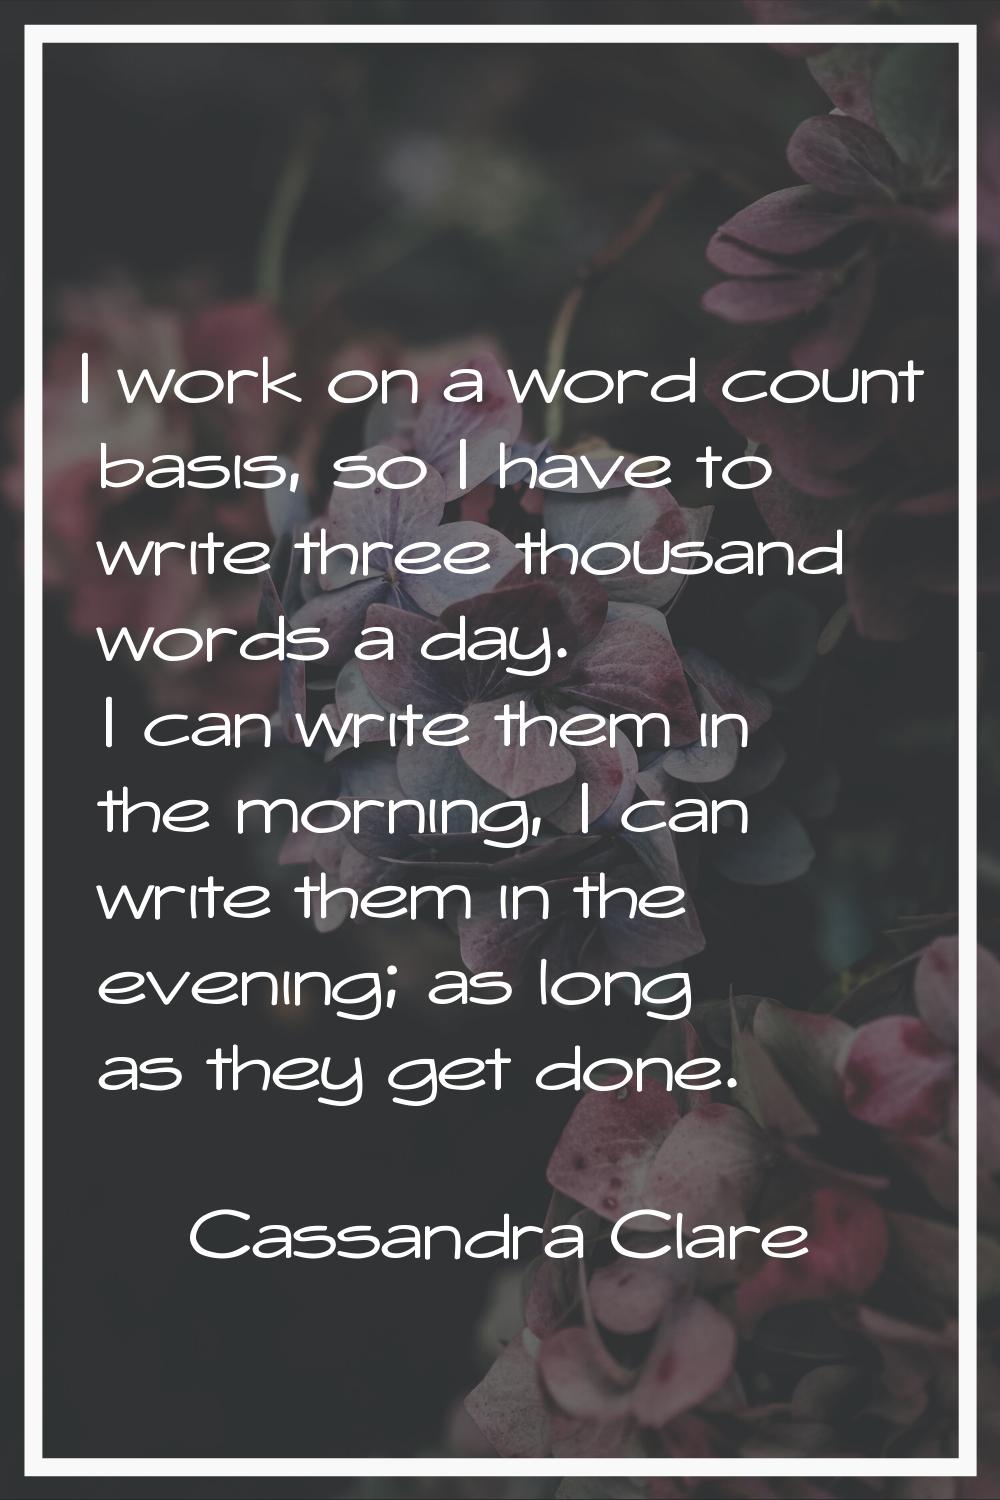 I work on a word count basis, so I have to write three thousand words a day. I can write them in th